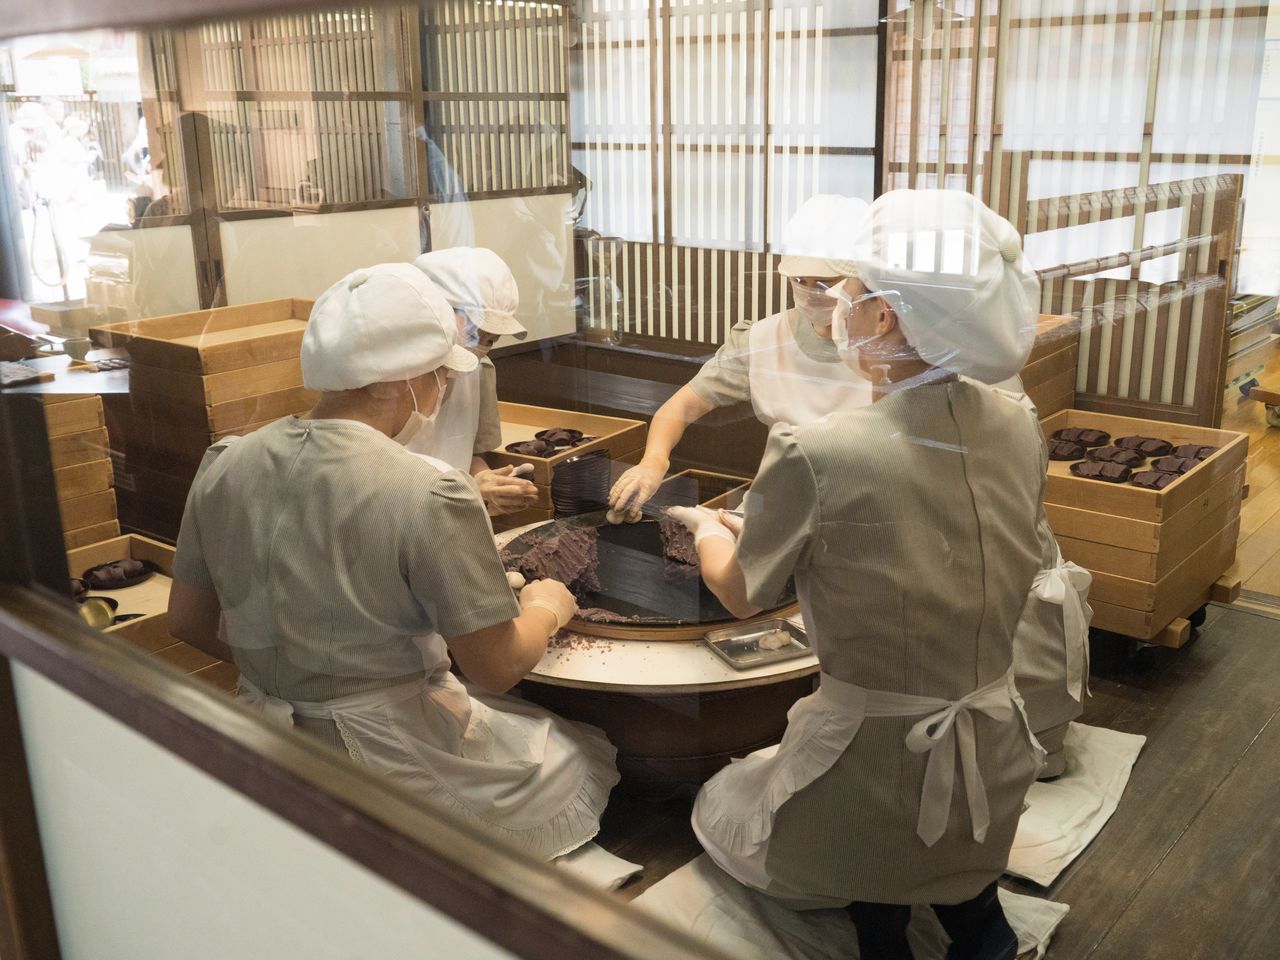 Visitors can watch the craftspeople making the <em>mochi</em> by hand.